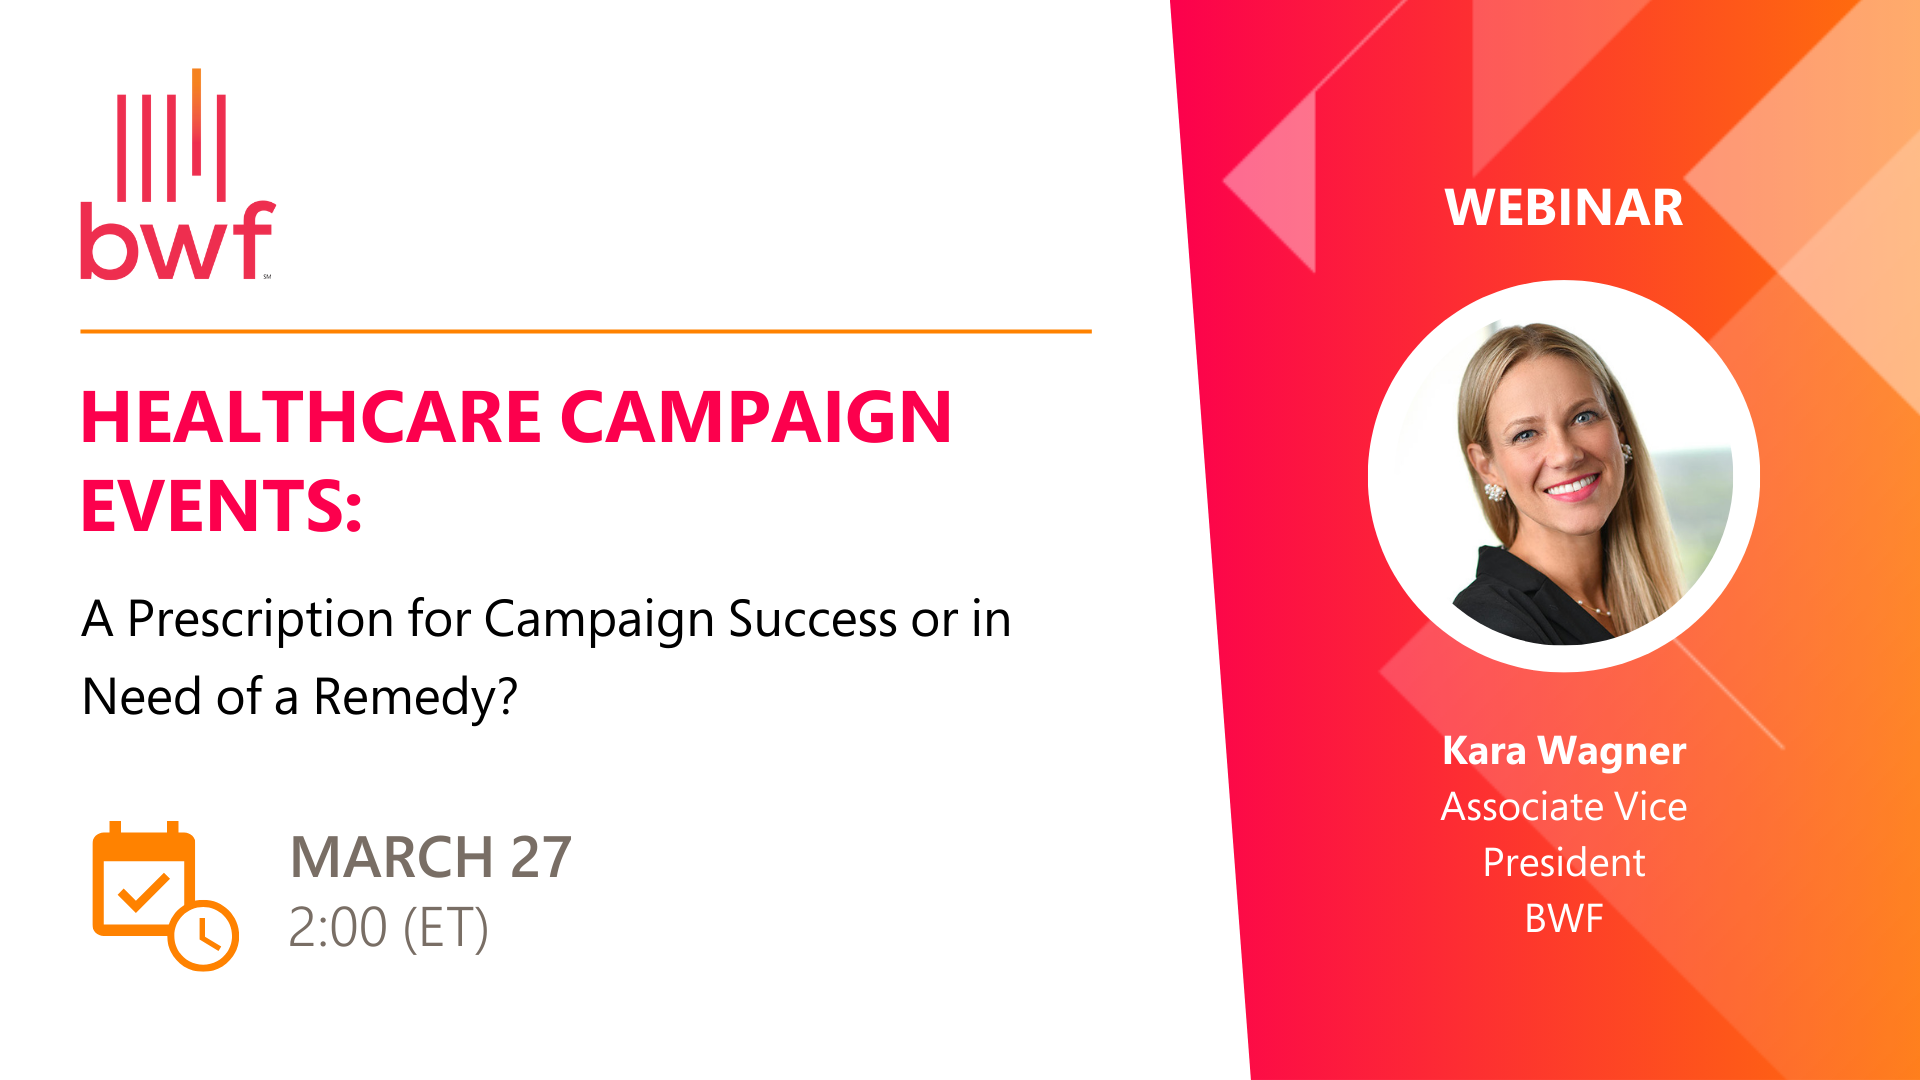 Healthcare Campaign Events: A Prescription for Campaign Success or in Need of a Remedy?